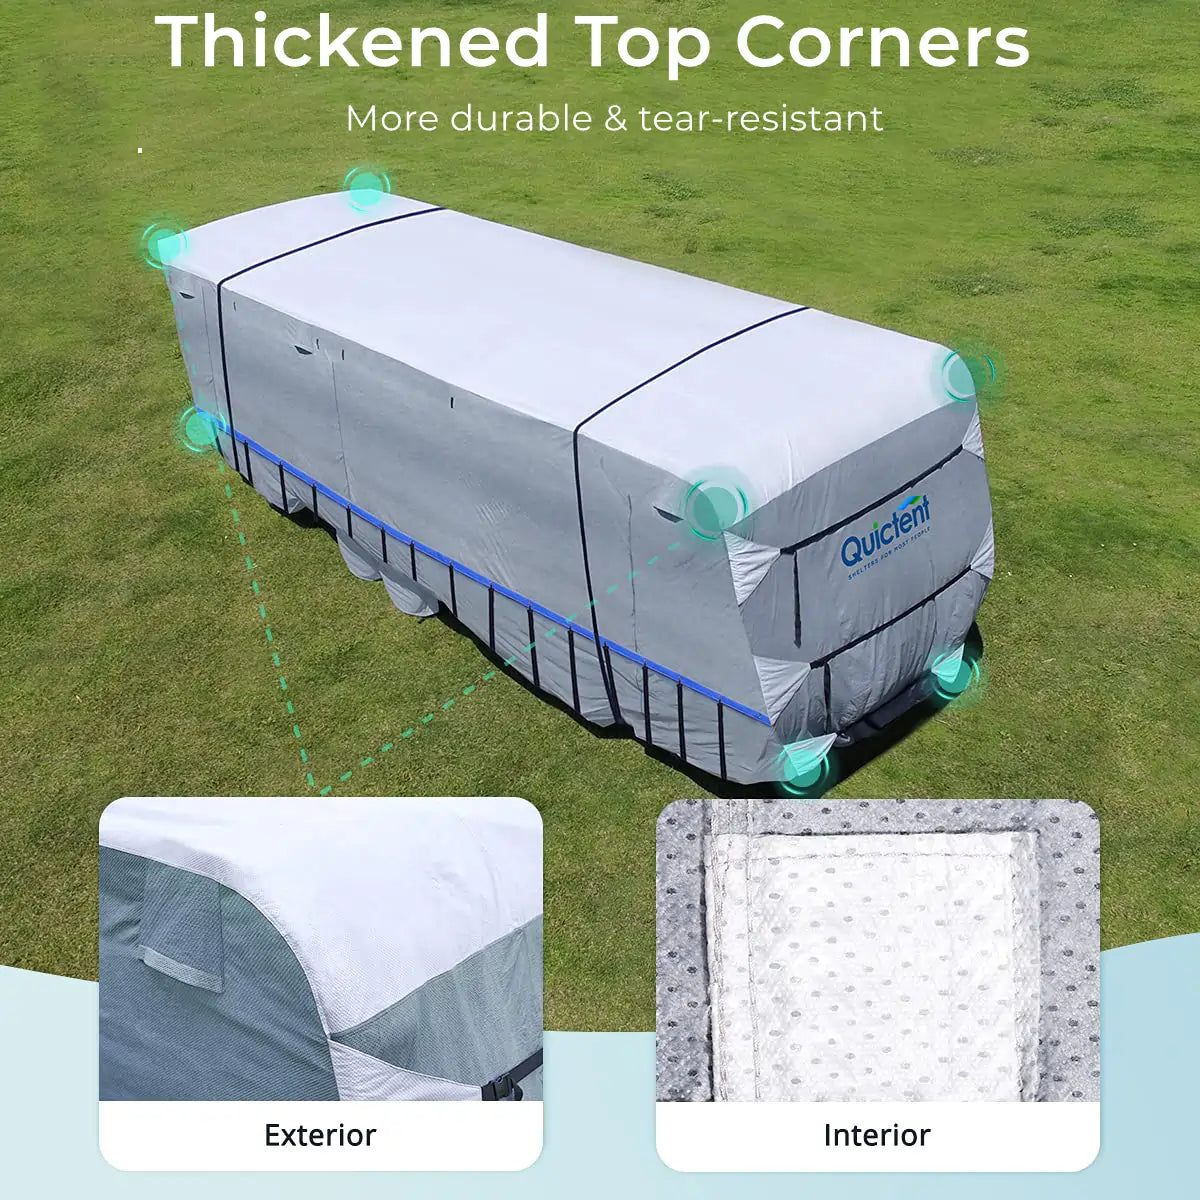 Extra-thick Class A RV Covers